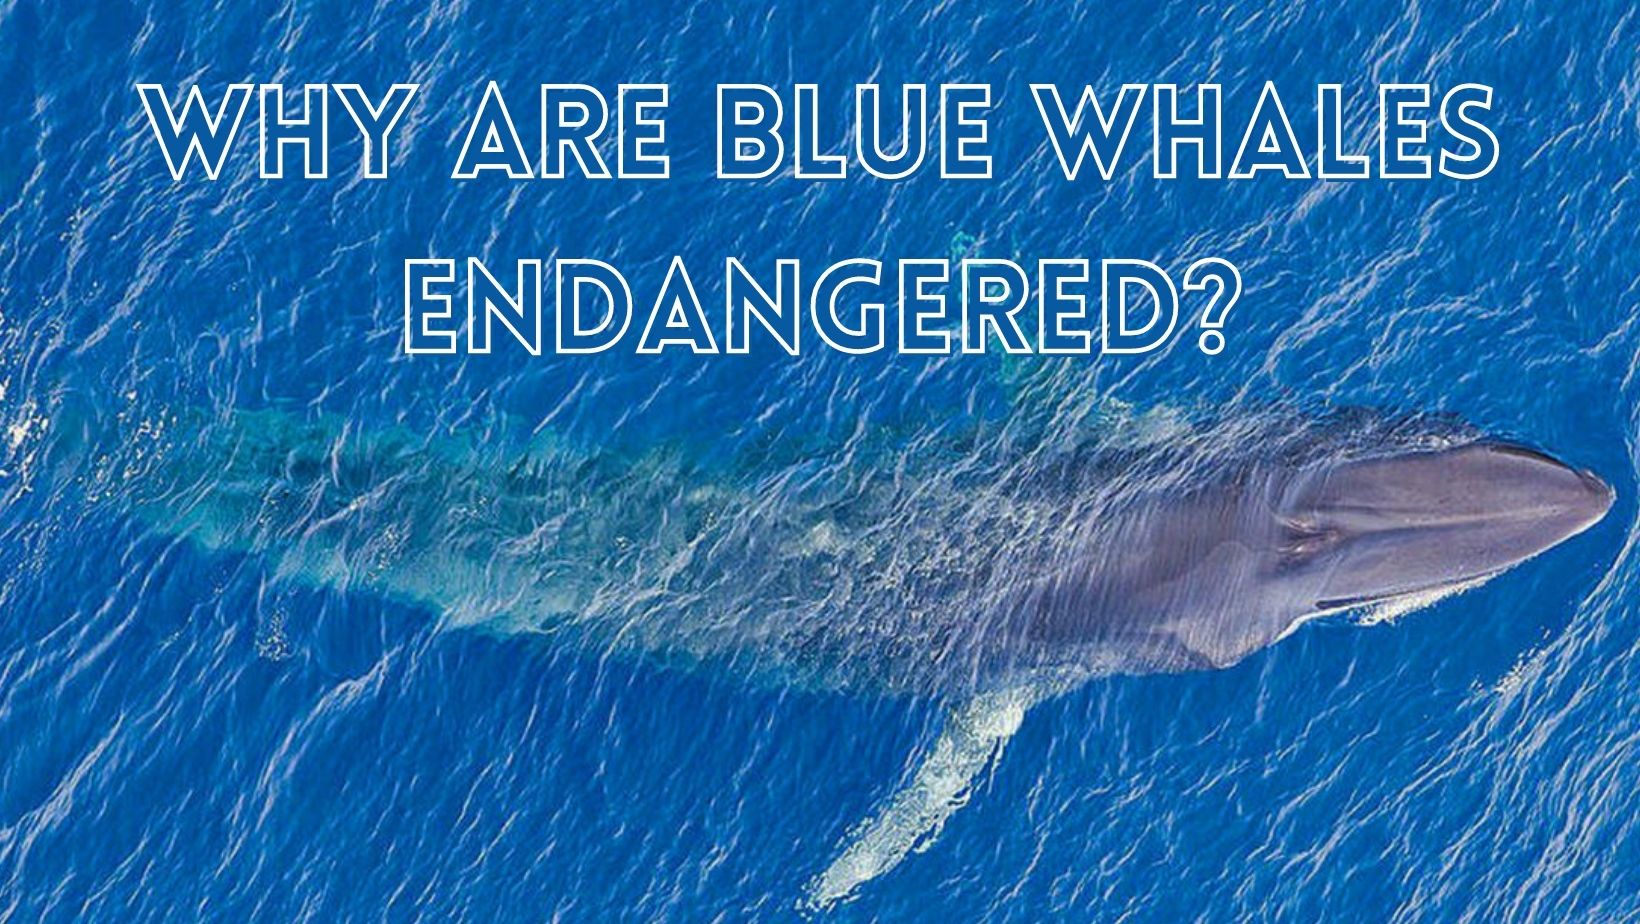 Facts about why are blue whales endangered